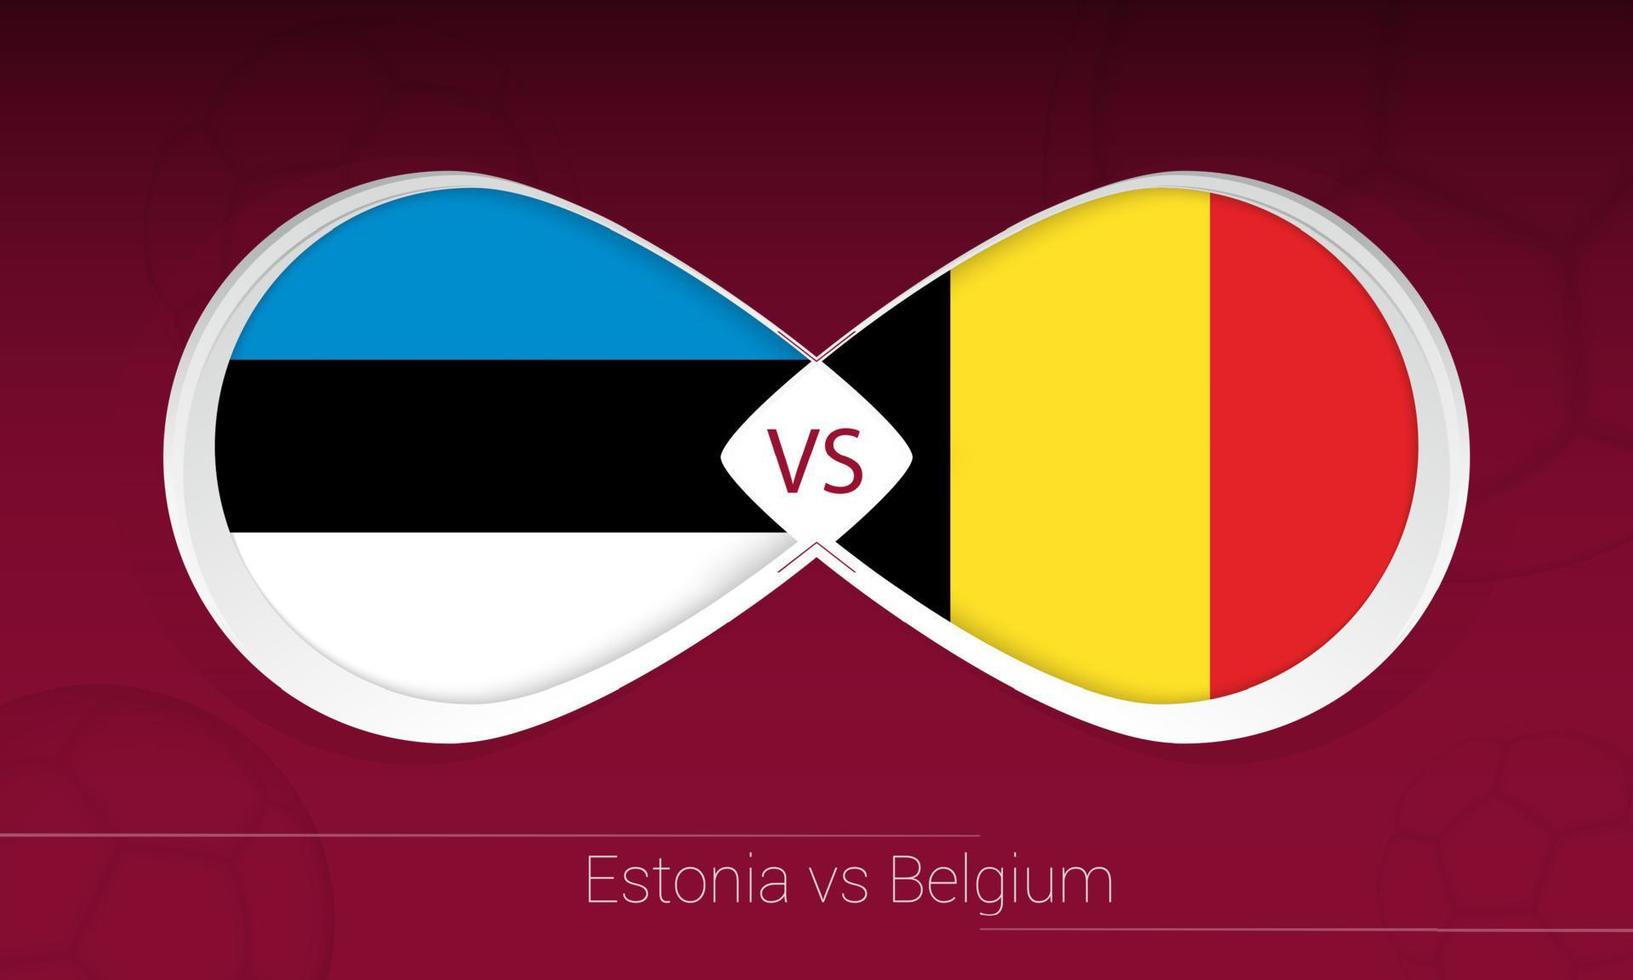 Estonia vs Belgium in Football Competition, Group E. Versus icon on Football background. vector